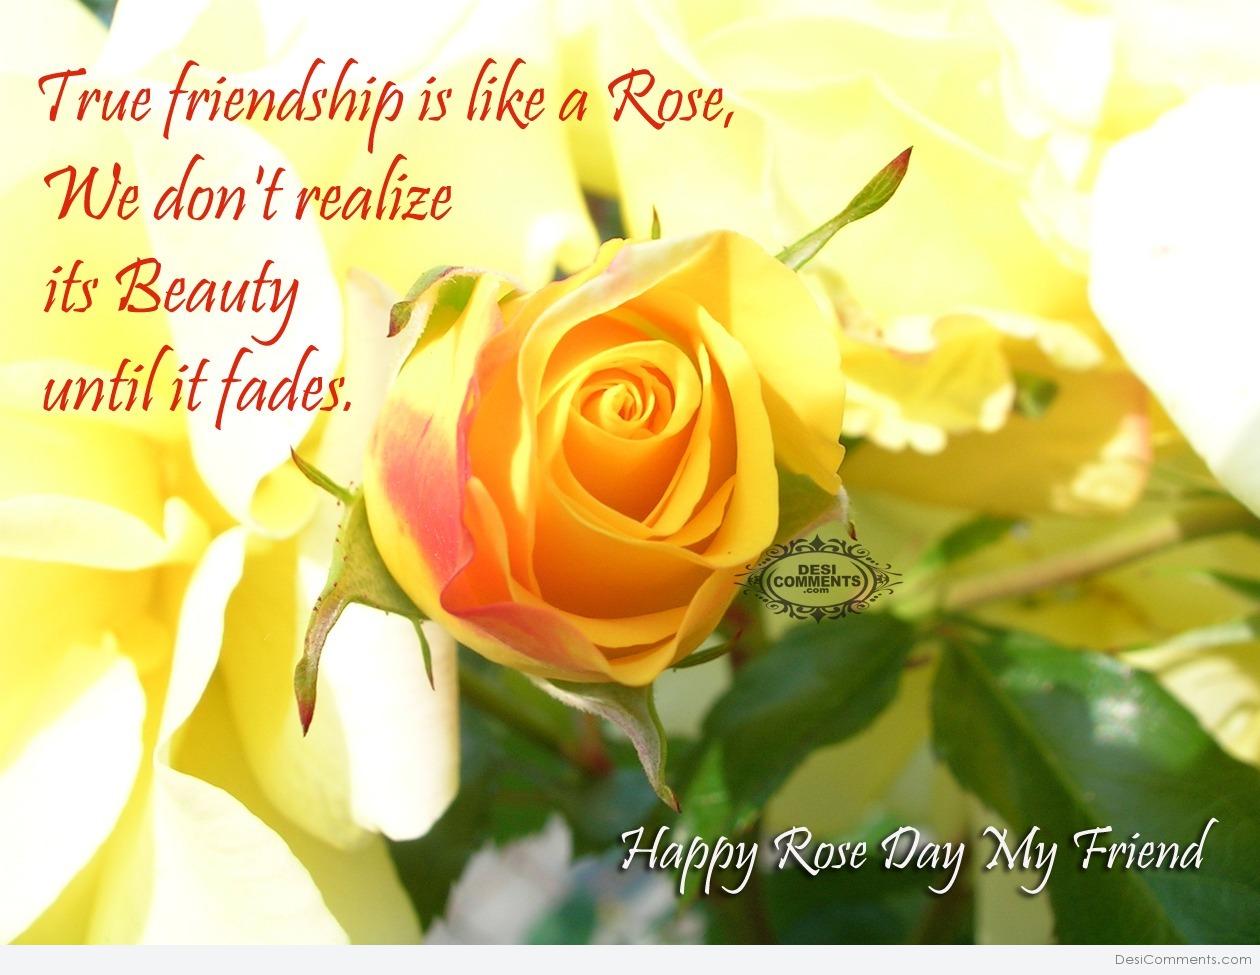 Happy Rose Day – True friendship is like a rose… - DesiComments.com